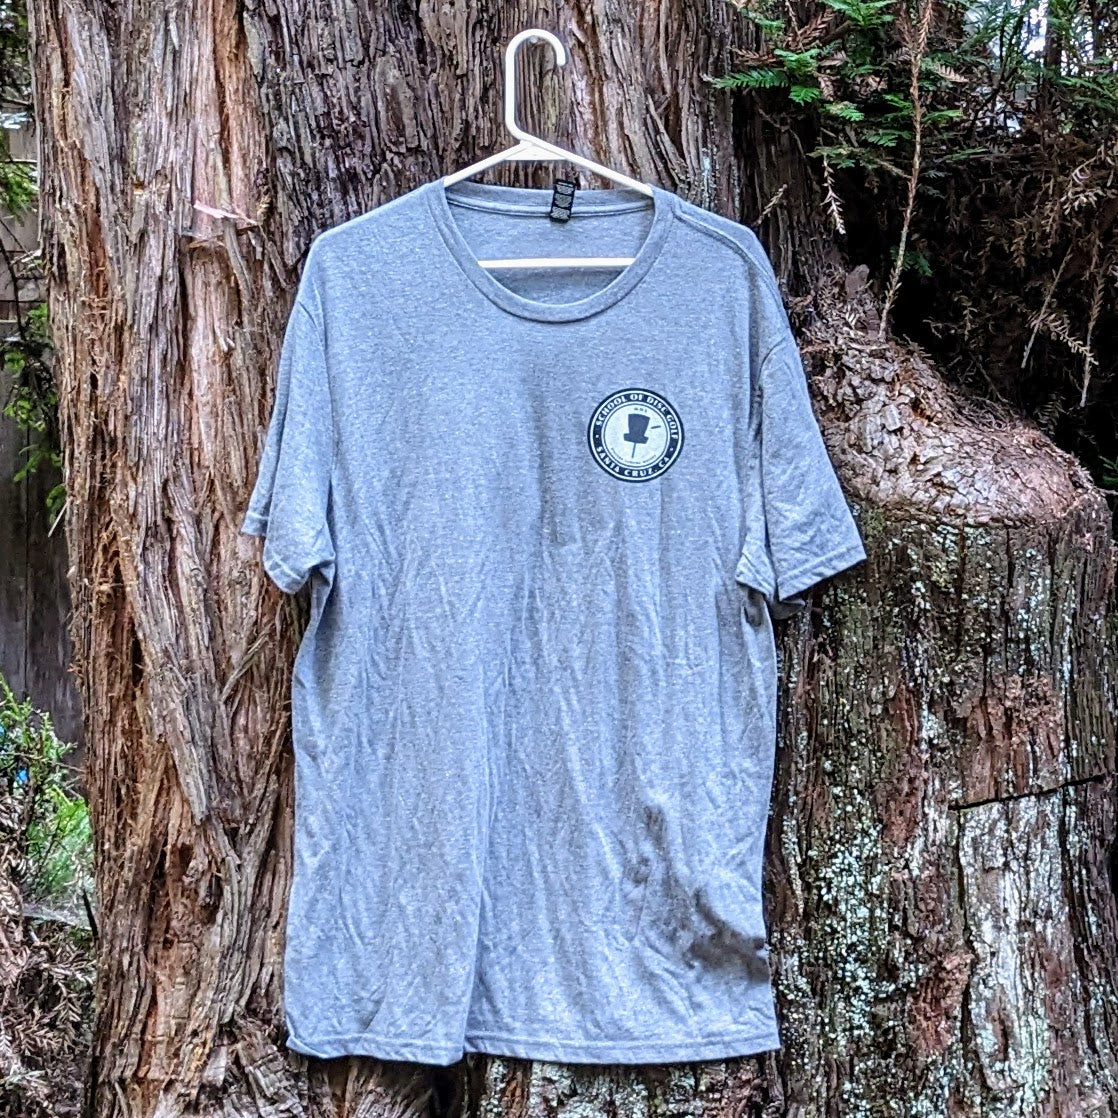 Clearance- Gray District 50/50 short sleeve tee with black and white School of Disc Golf logo front and back, size XL